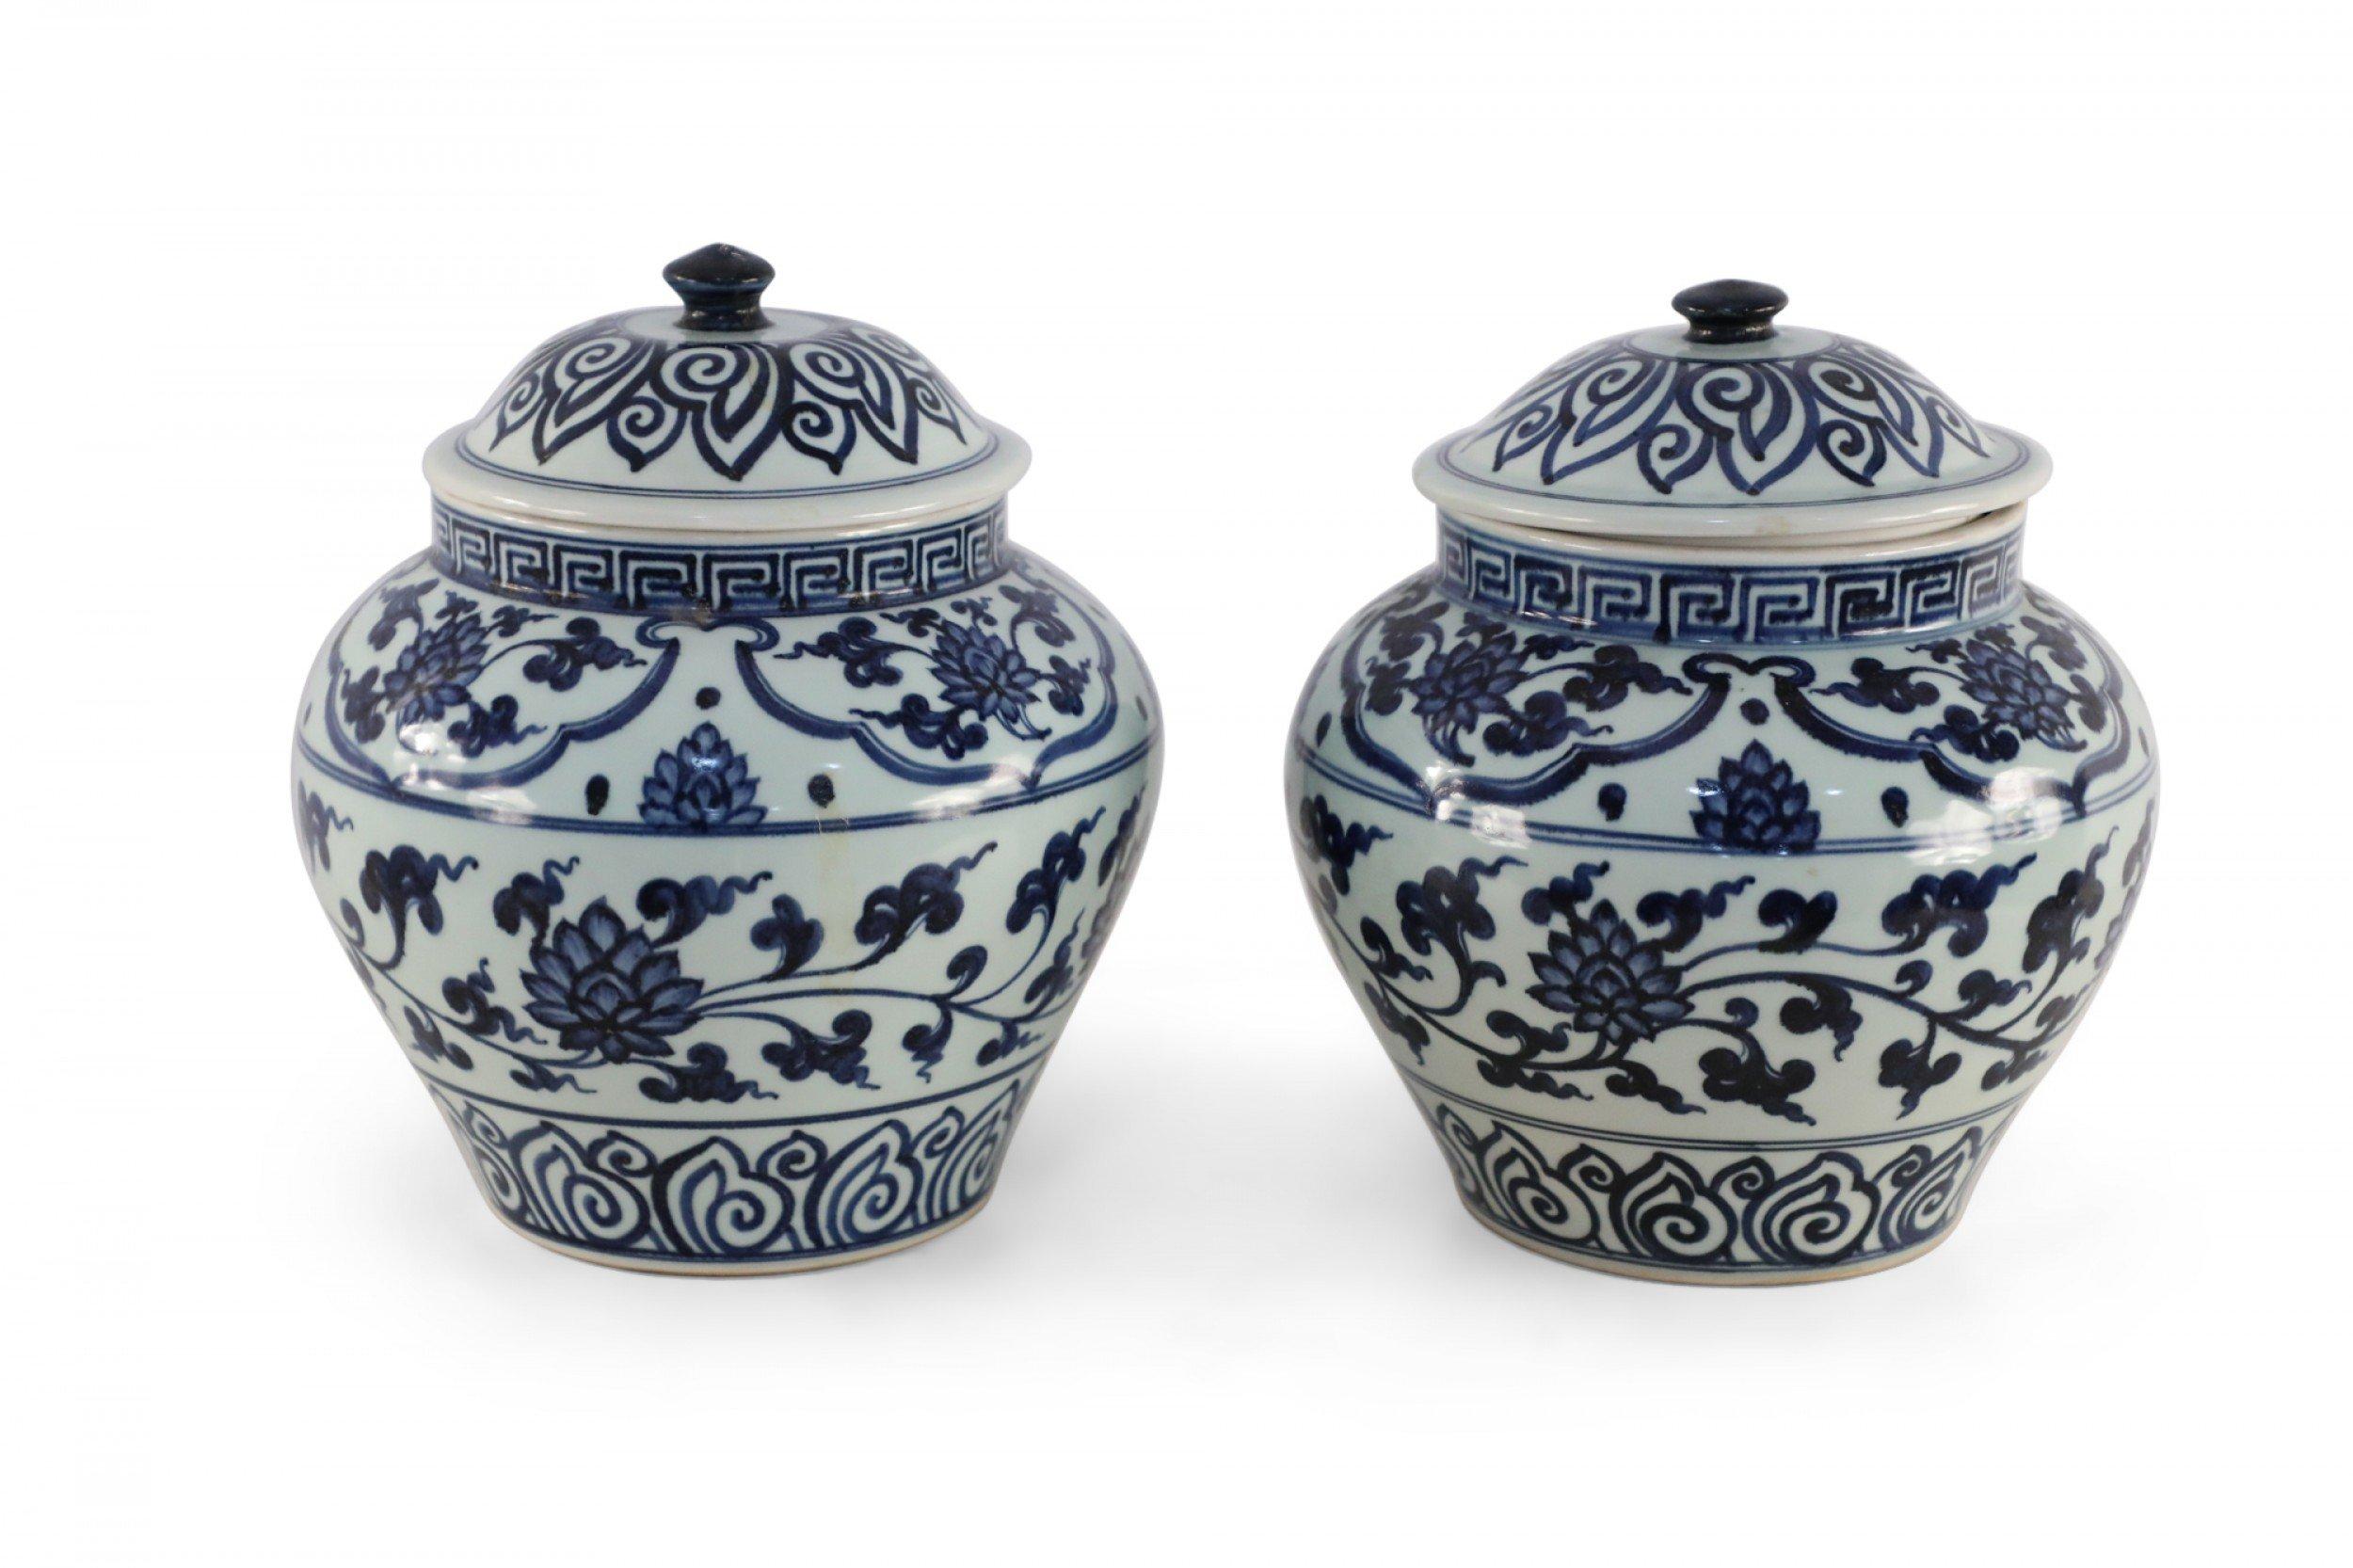 Pair of White and Blue Pattern Lidded Porcelain Ginger Jars For Sale 3